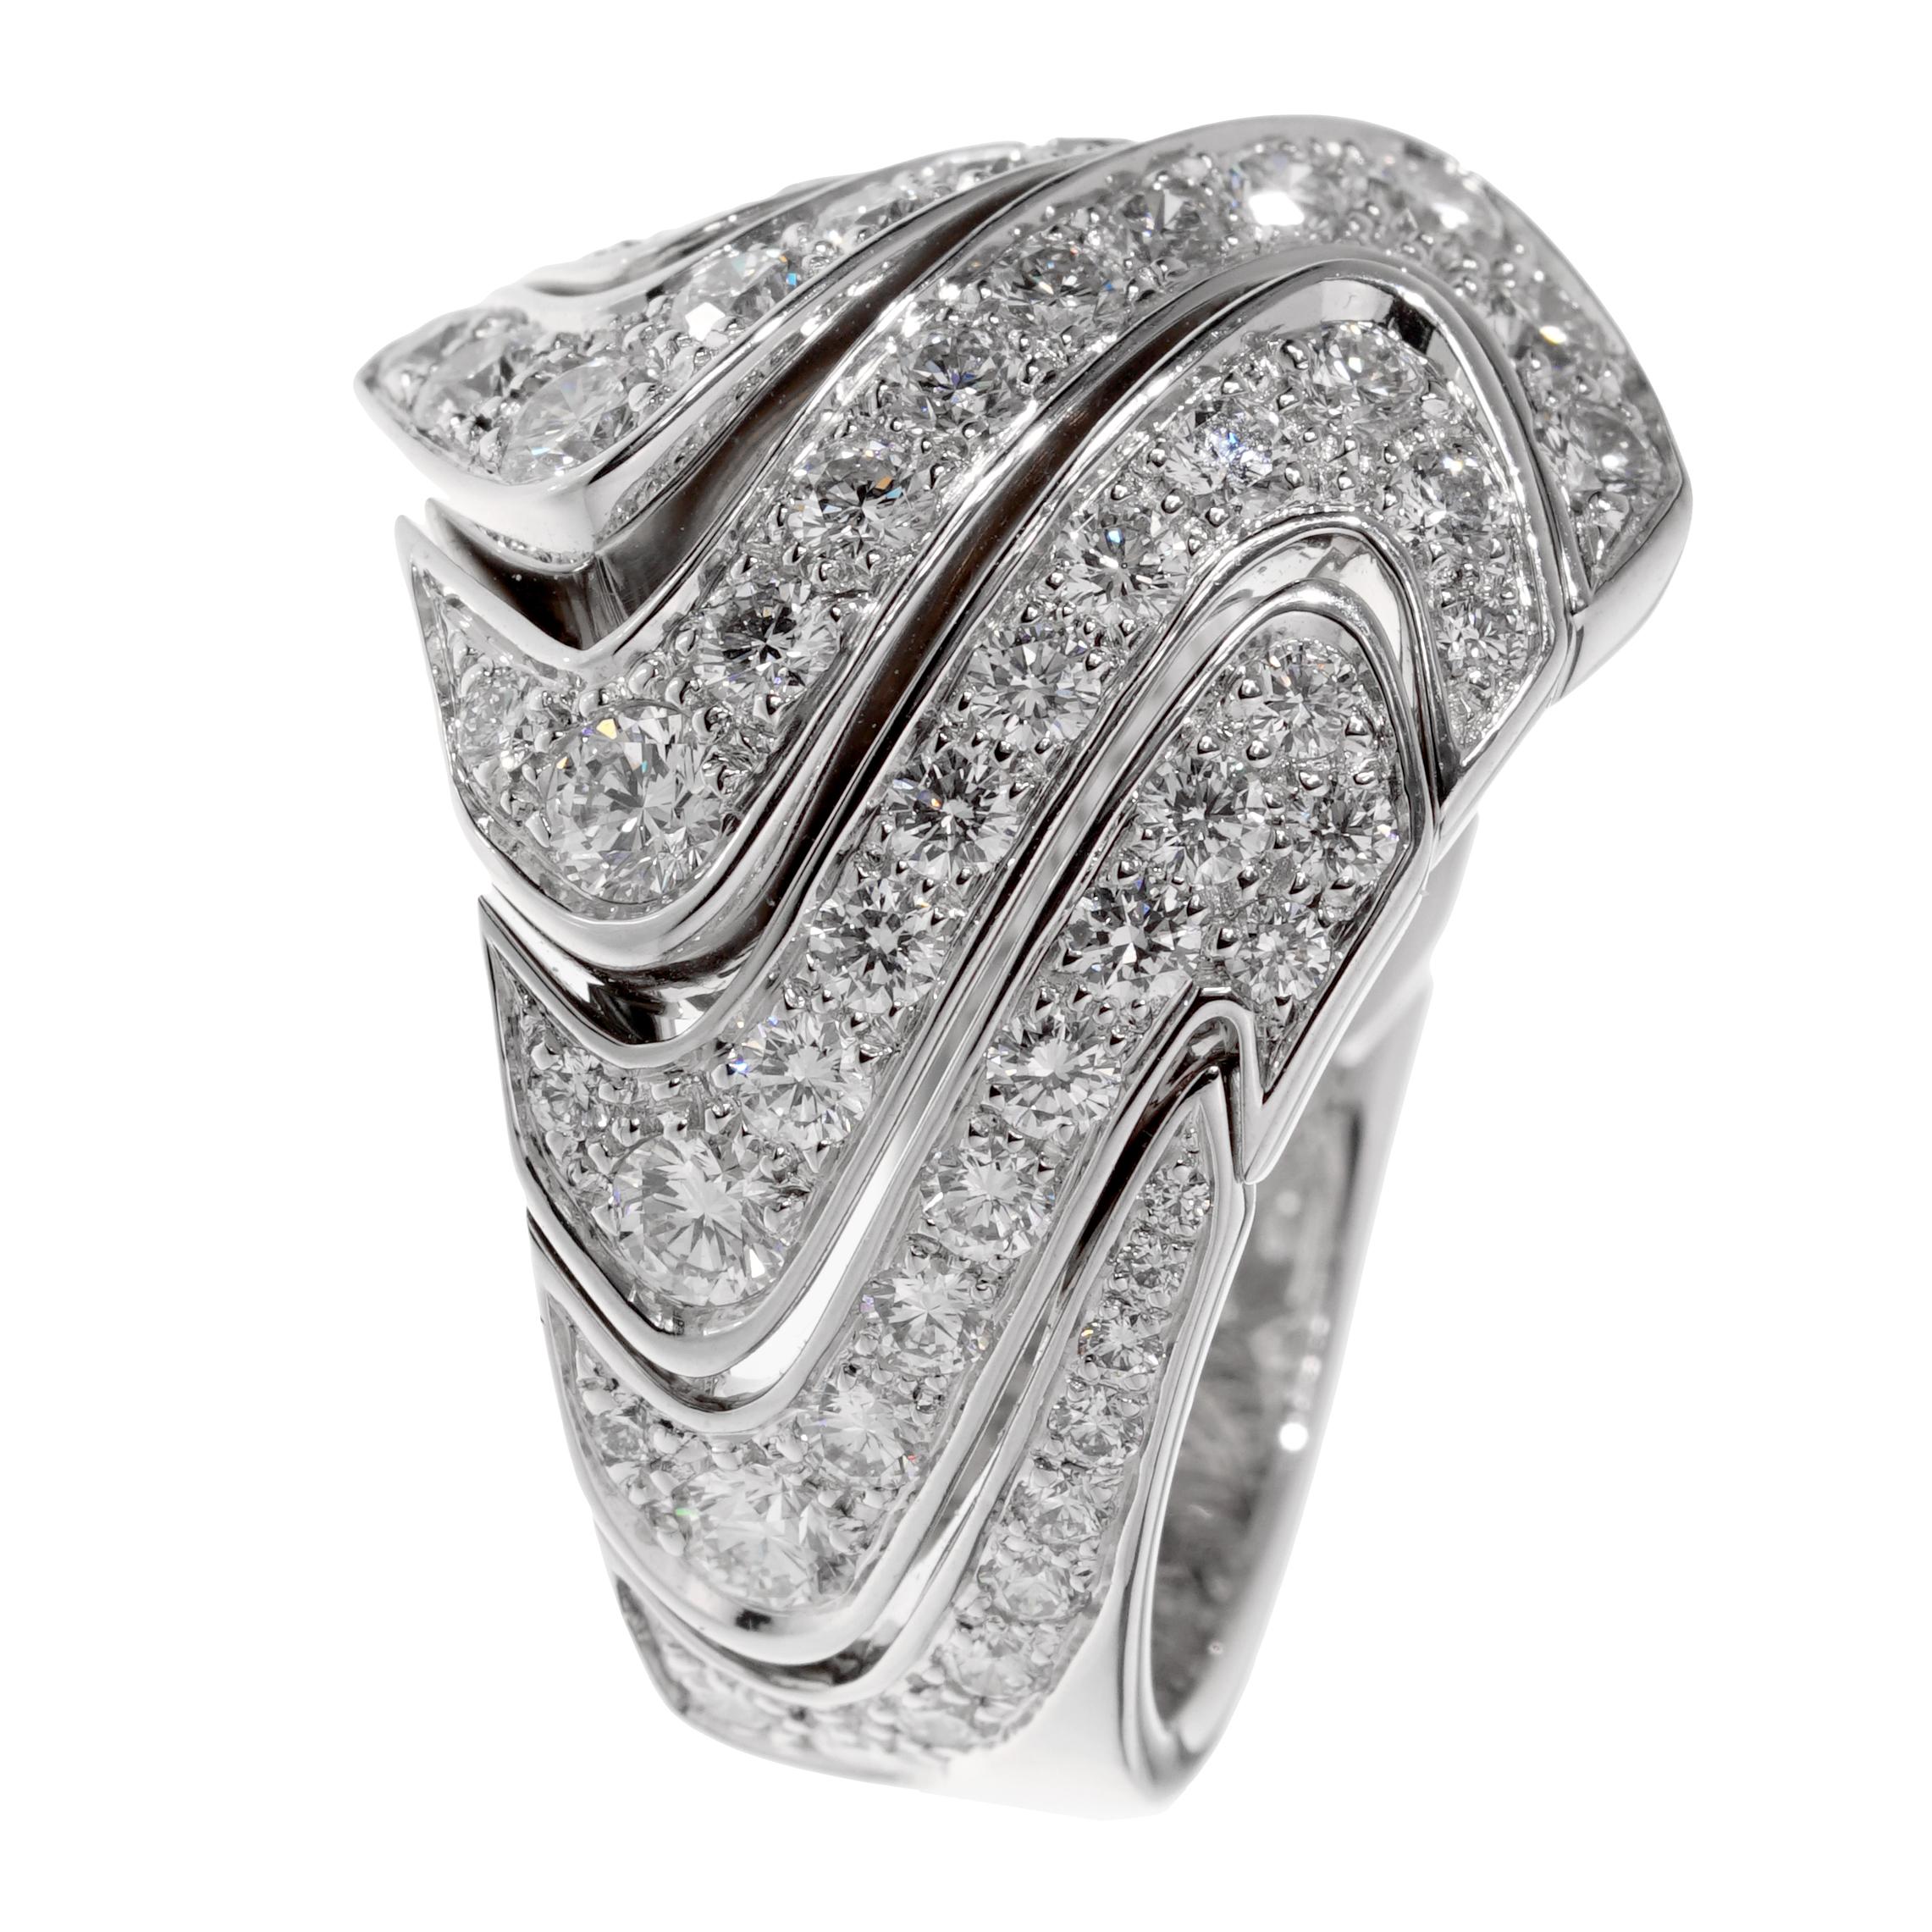 A magnificent cocktail ring by Cartier showcasing a plethora of the finest Cartier round brilliant cut diamonds set in shimmering 18k white gold. The ring measures almost 1